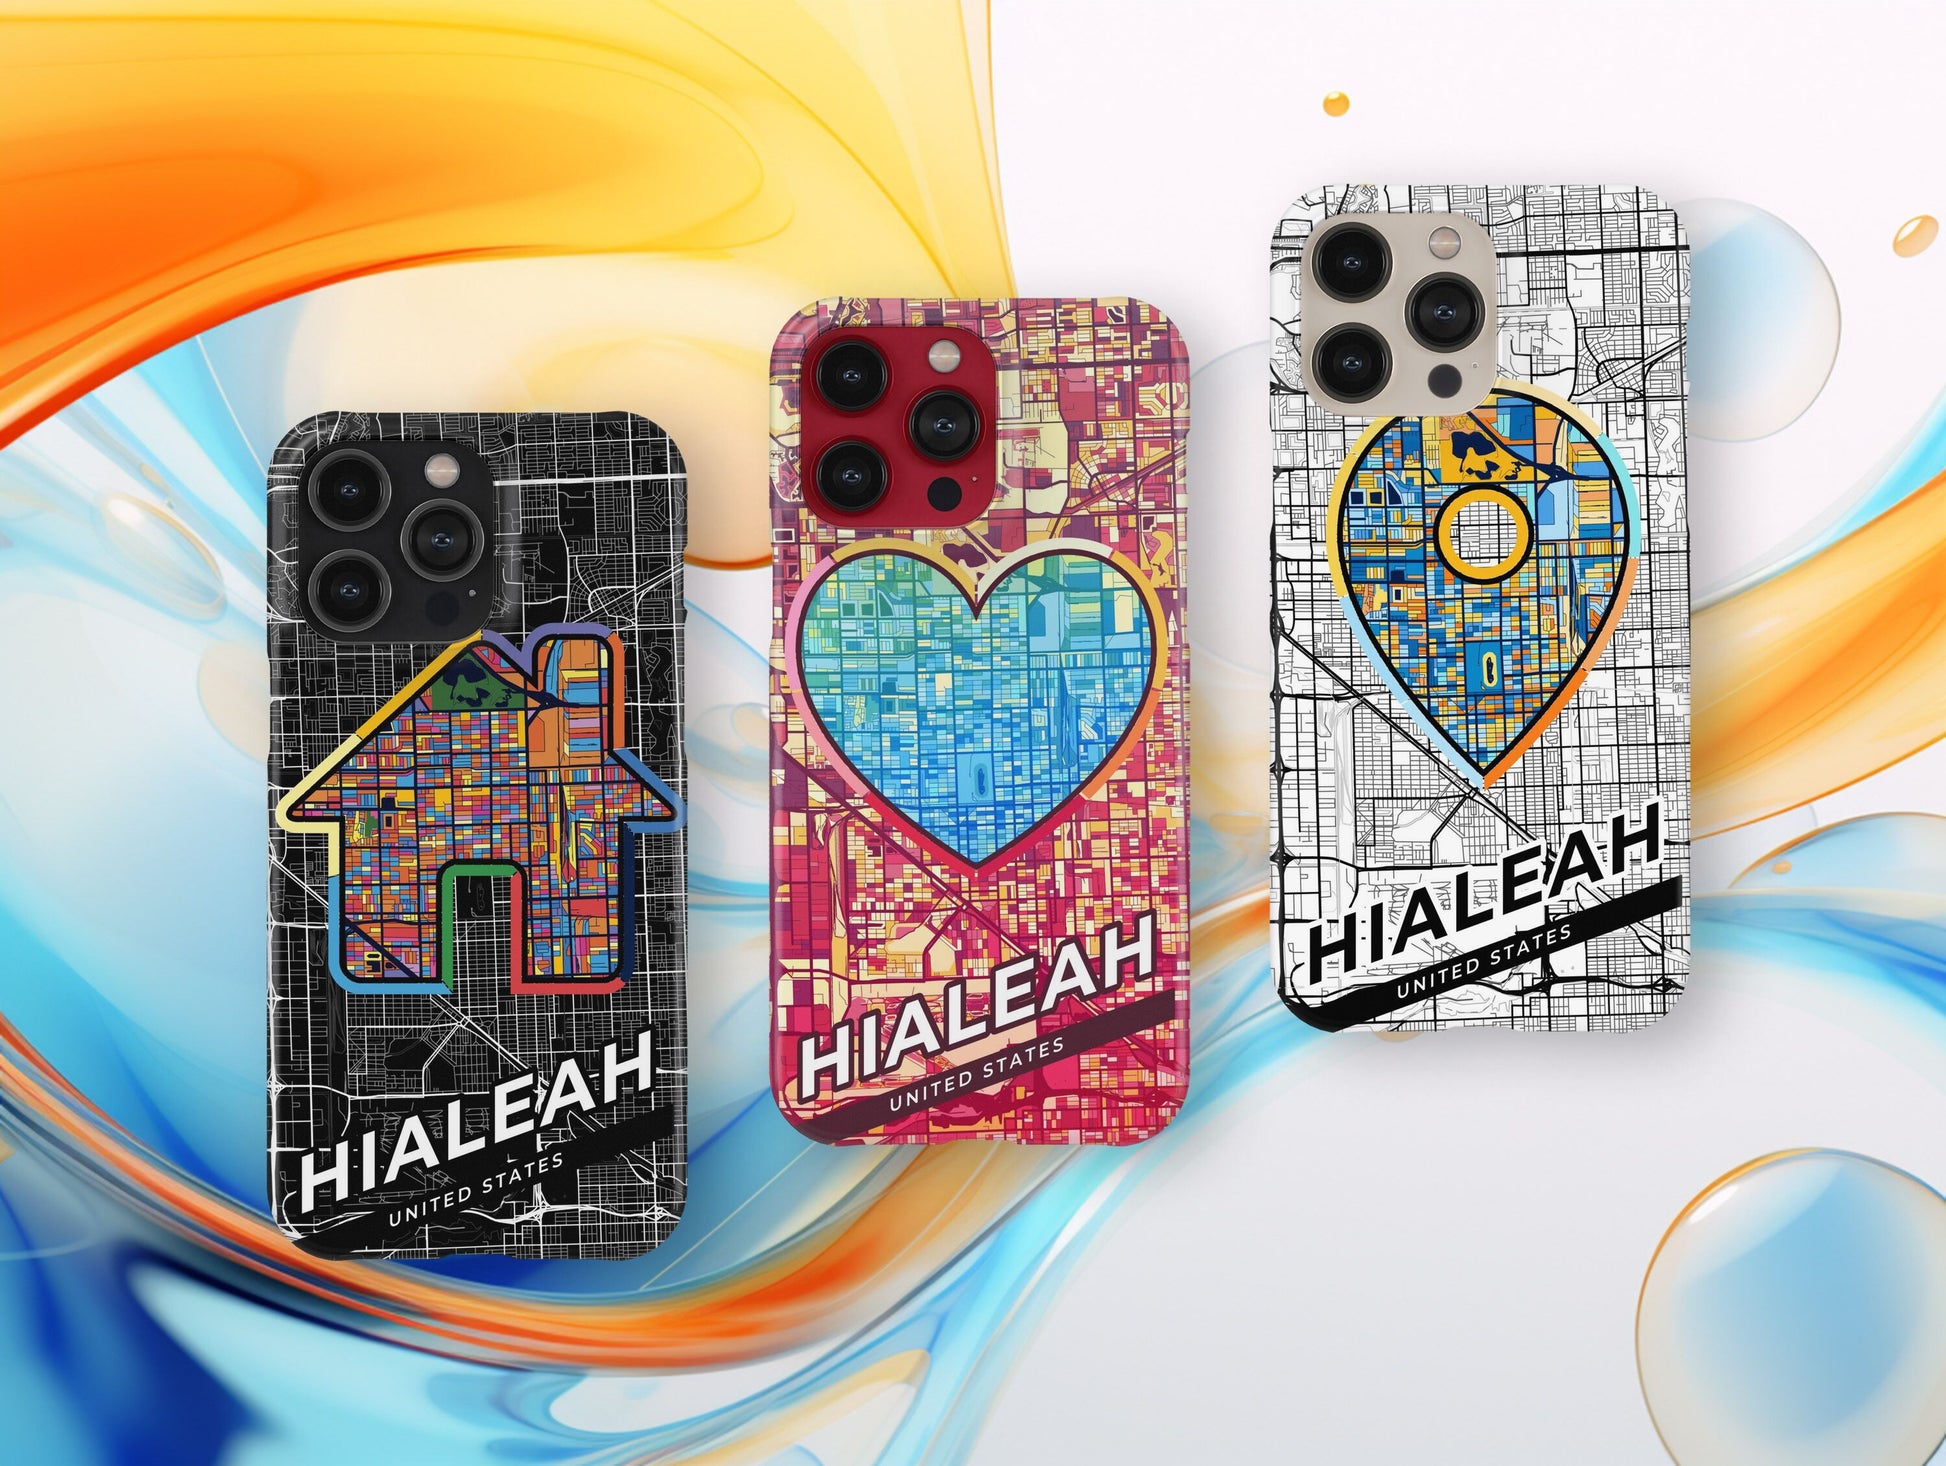 Hialeah Florida slim phone case with colorful icon. Birthday, wedding or housewarming gift. Couple match cases.